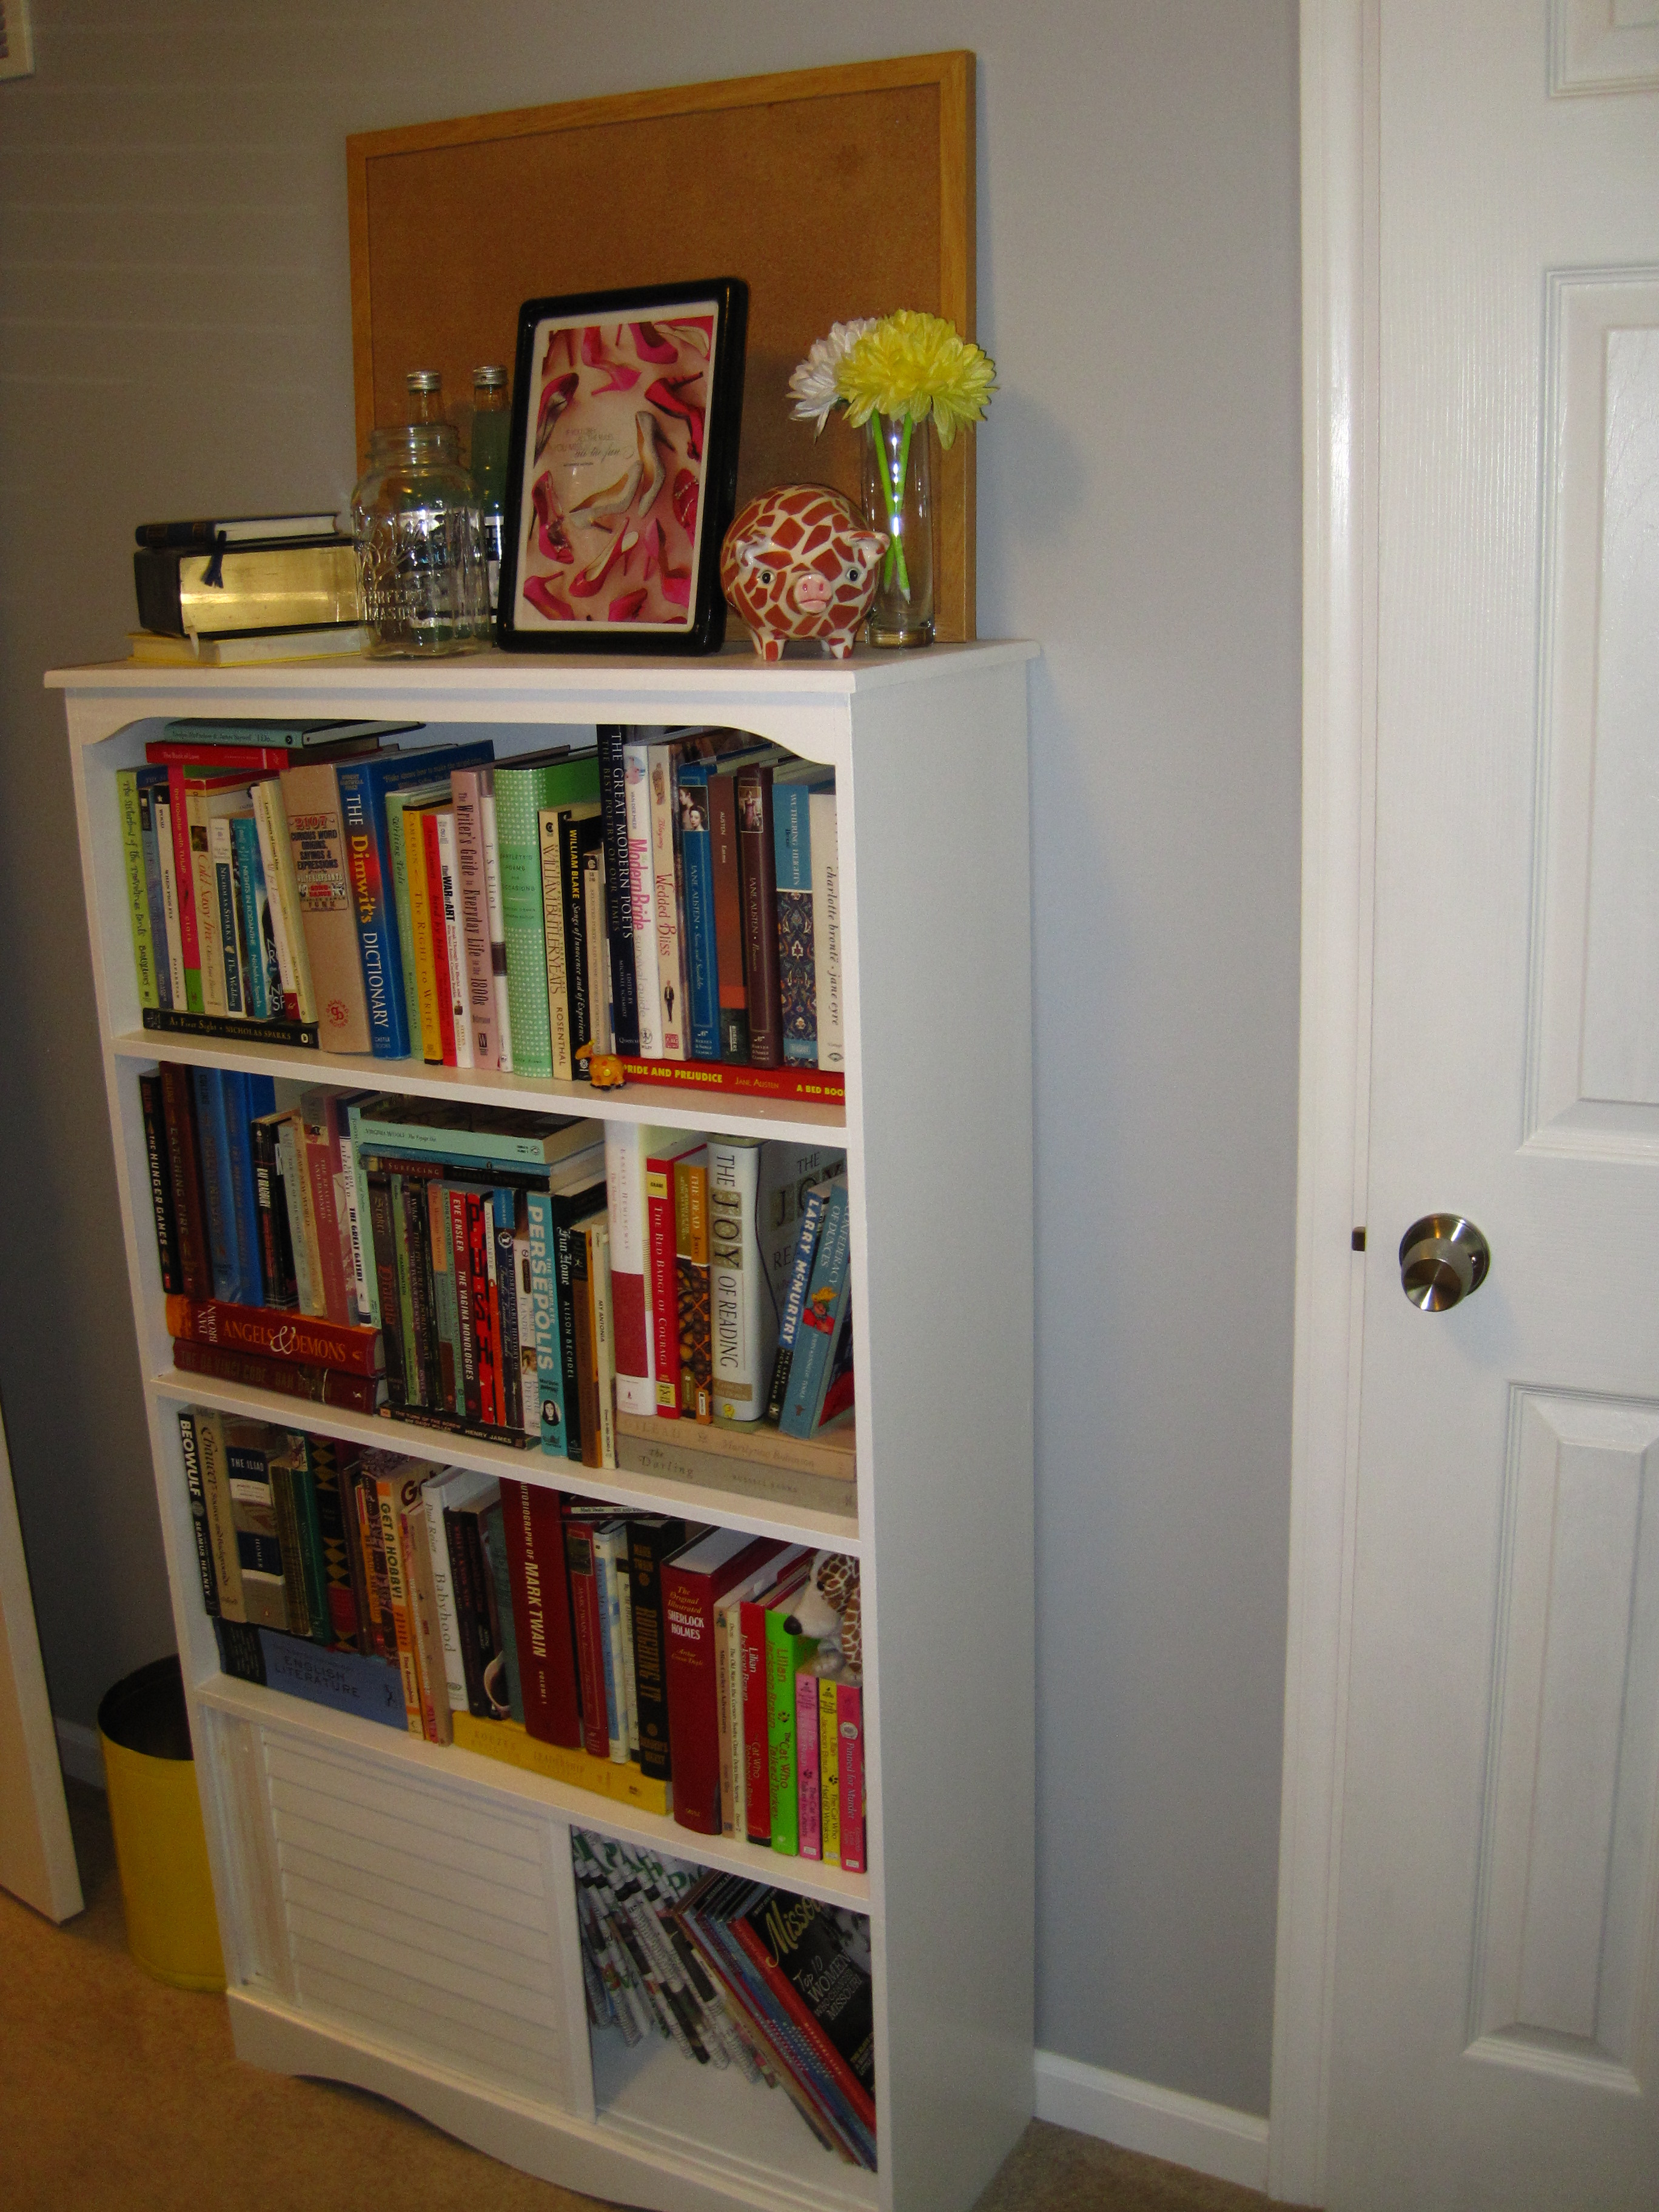 Shelfomatic (Bookshelf With Adjustable, In-rail Bookends) : 12 Steps -  Instructables